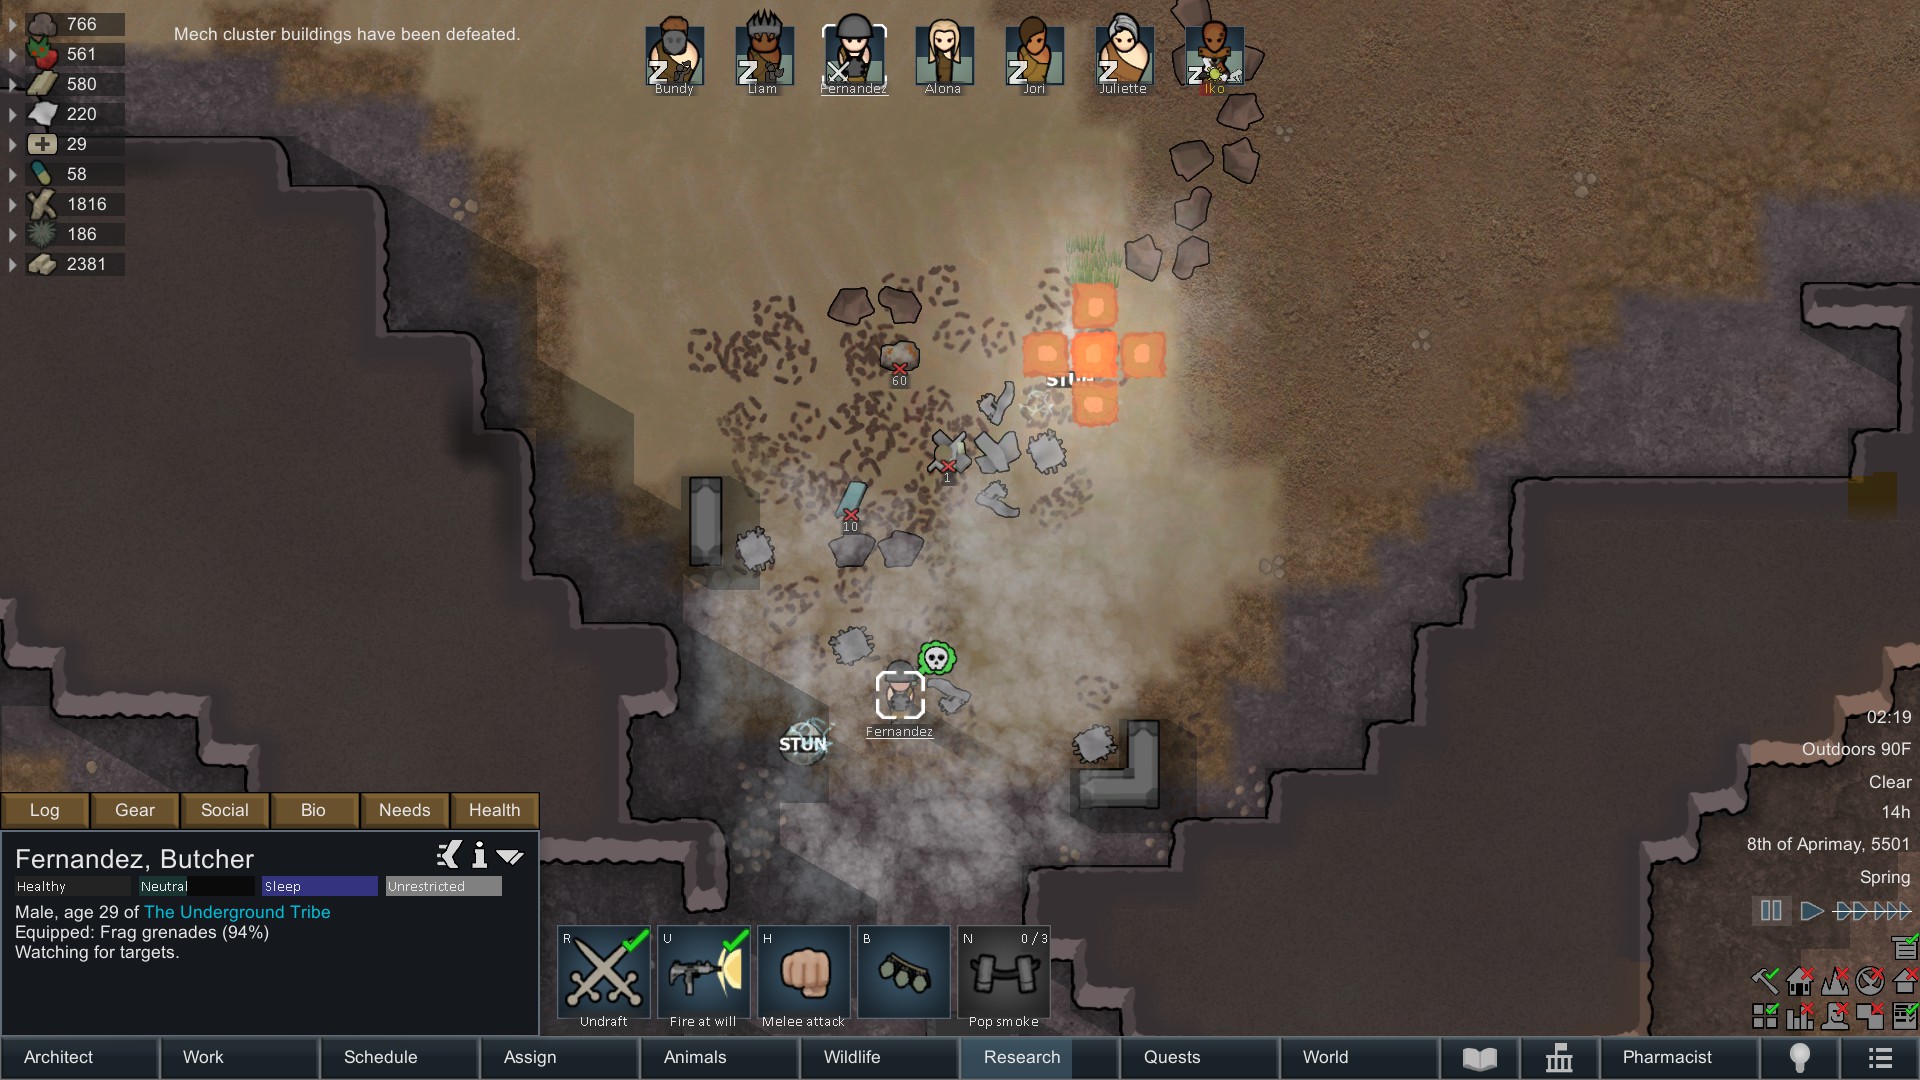 RimWorld - Colony Raids Information in 2 years Guide - Dealing With A Early Game Mech Cluster - 3C9DA5E